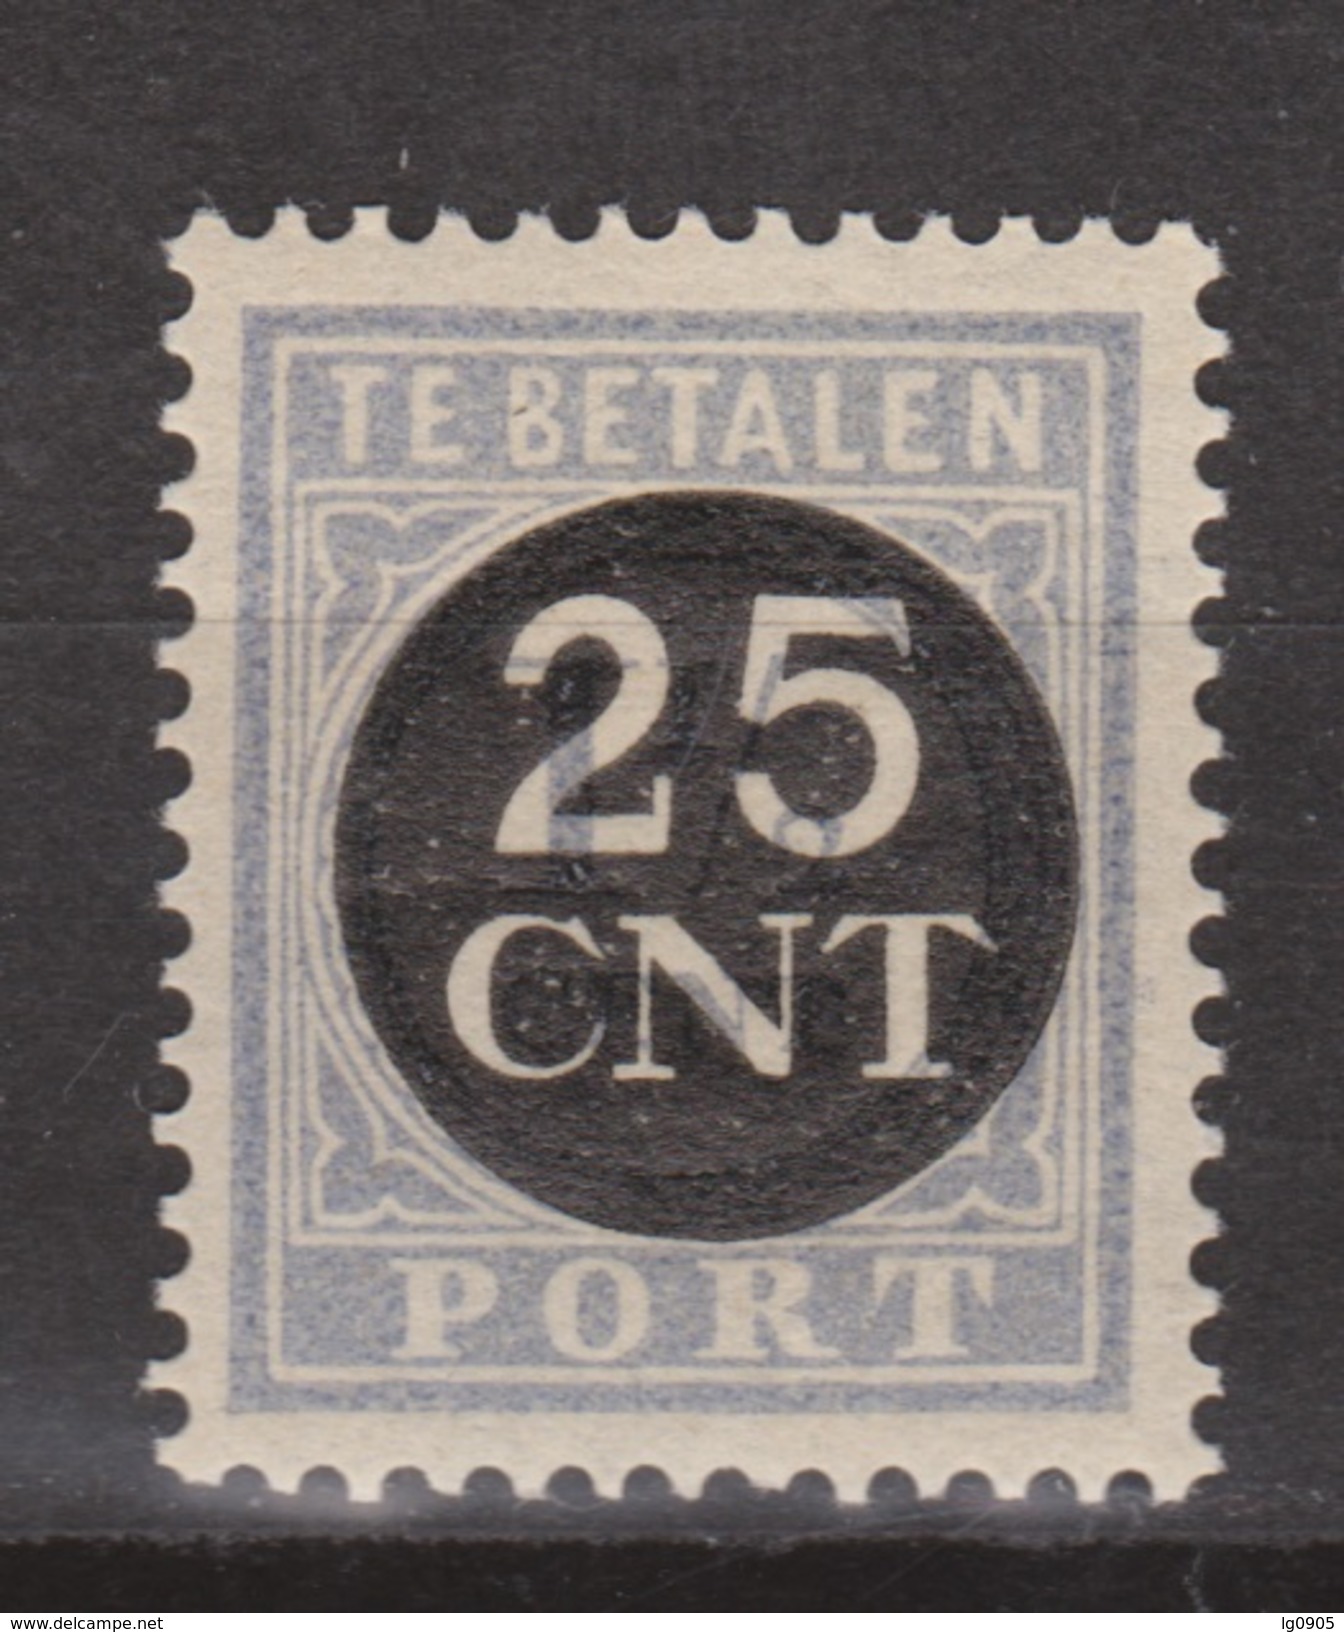 NVPH Nederland Netherlands Holanda Pays Bas Port 63 MLH Timbre-taxe Postmarke Sellos De Correos NOW MANY DUE STAMPS - Postage Due